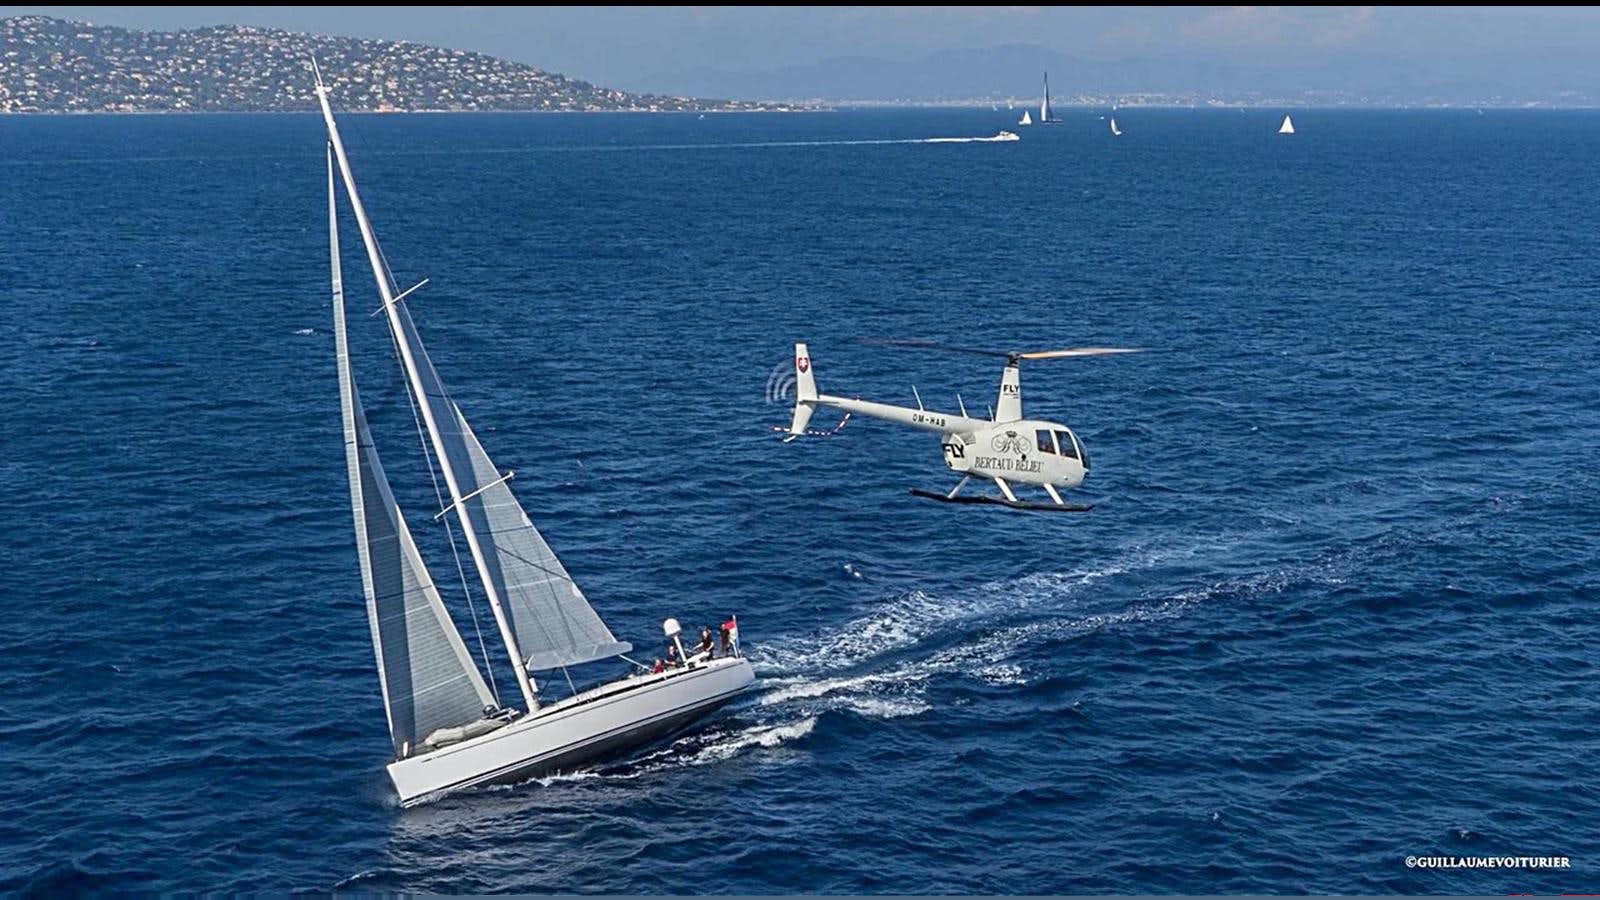 Flyer
Yacht for Sale